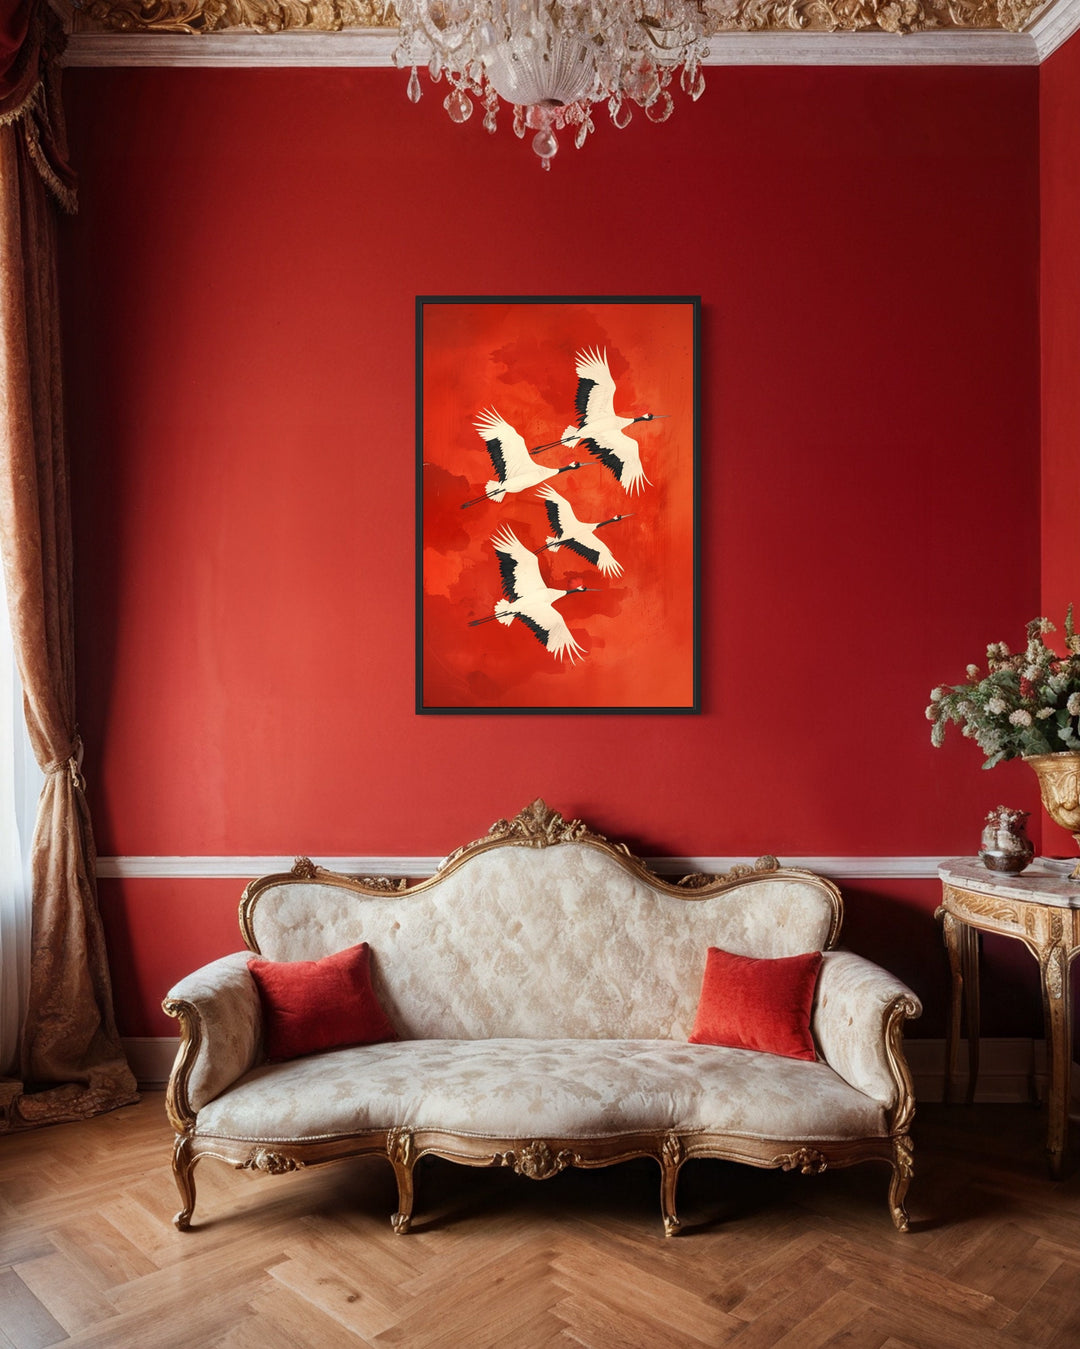 Japanese Cranes Flying Red Framed Canvas Wall Art in red room